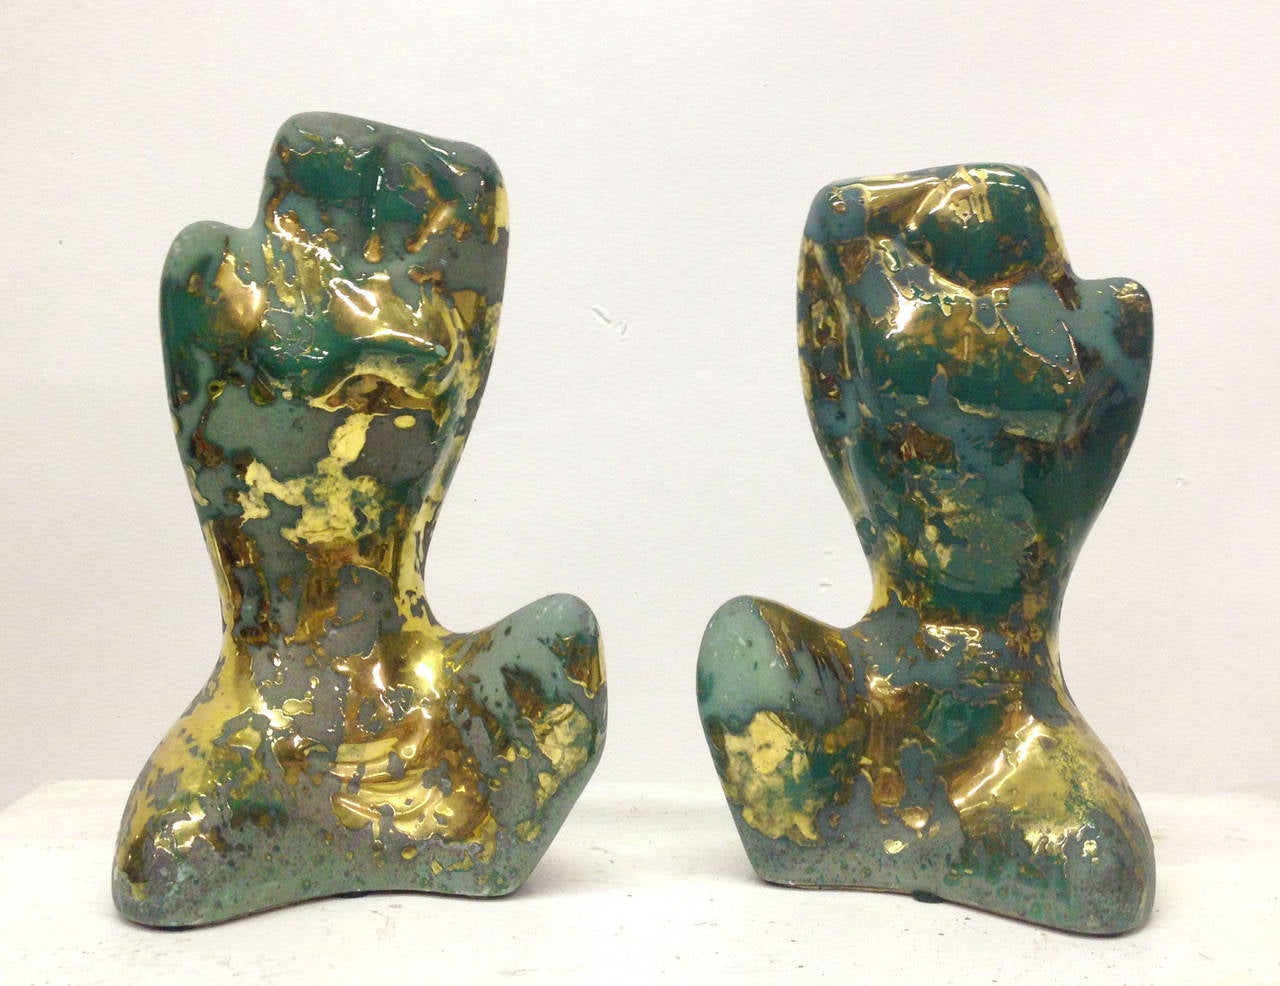 A pair of sculptures depicting a man and woman's bodies rendered in a classical fashion in modern materials. Each ceramic piece has a unique glaze that resembles oxidation and dripping gold. 
The sculpture of the woman measures 5.75